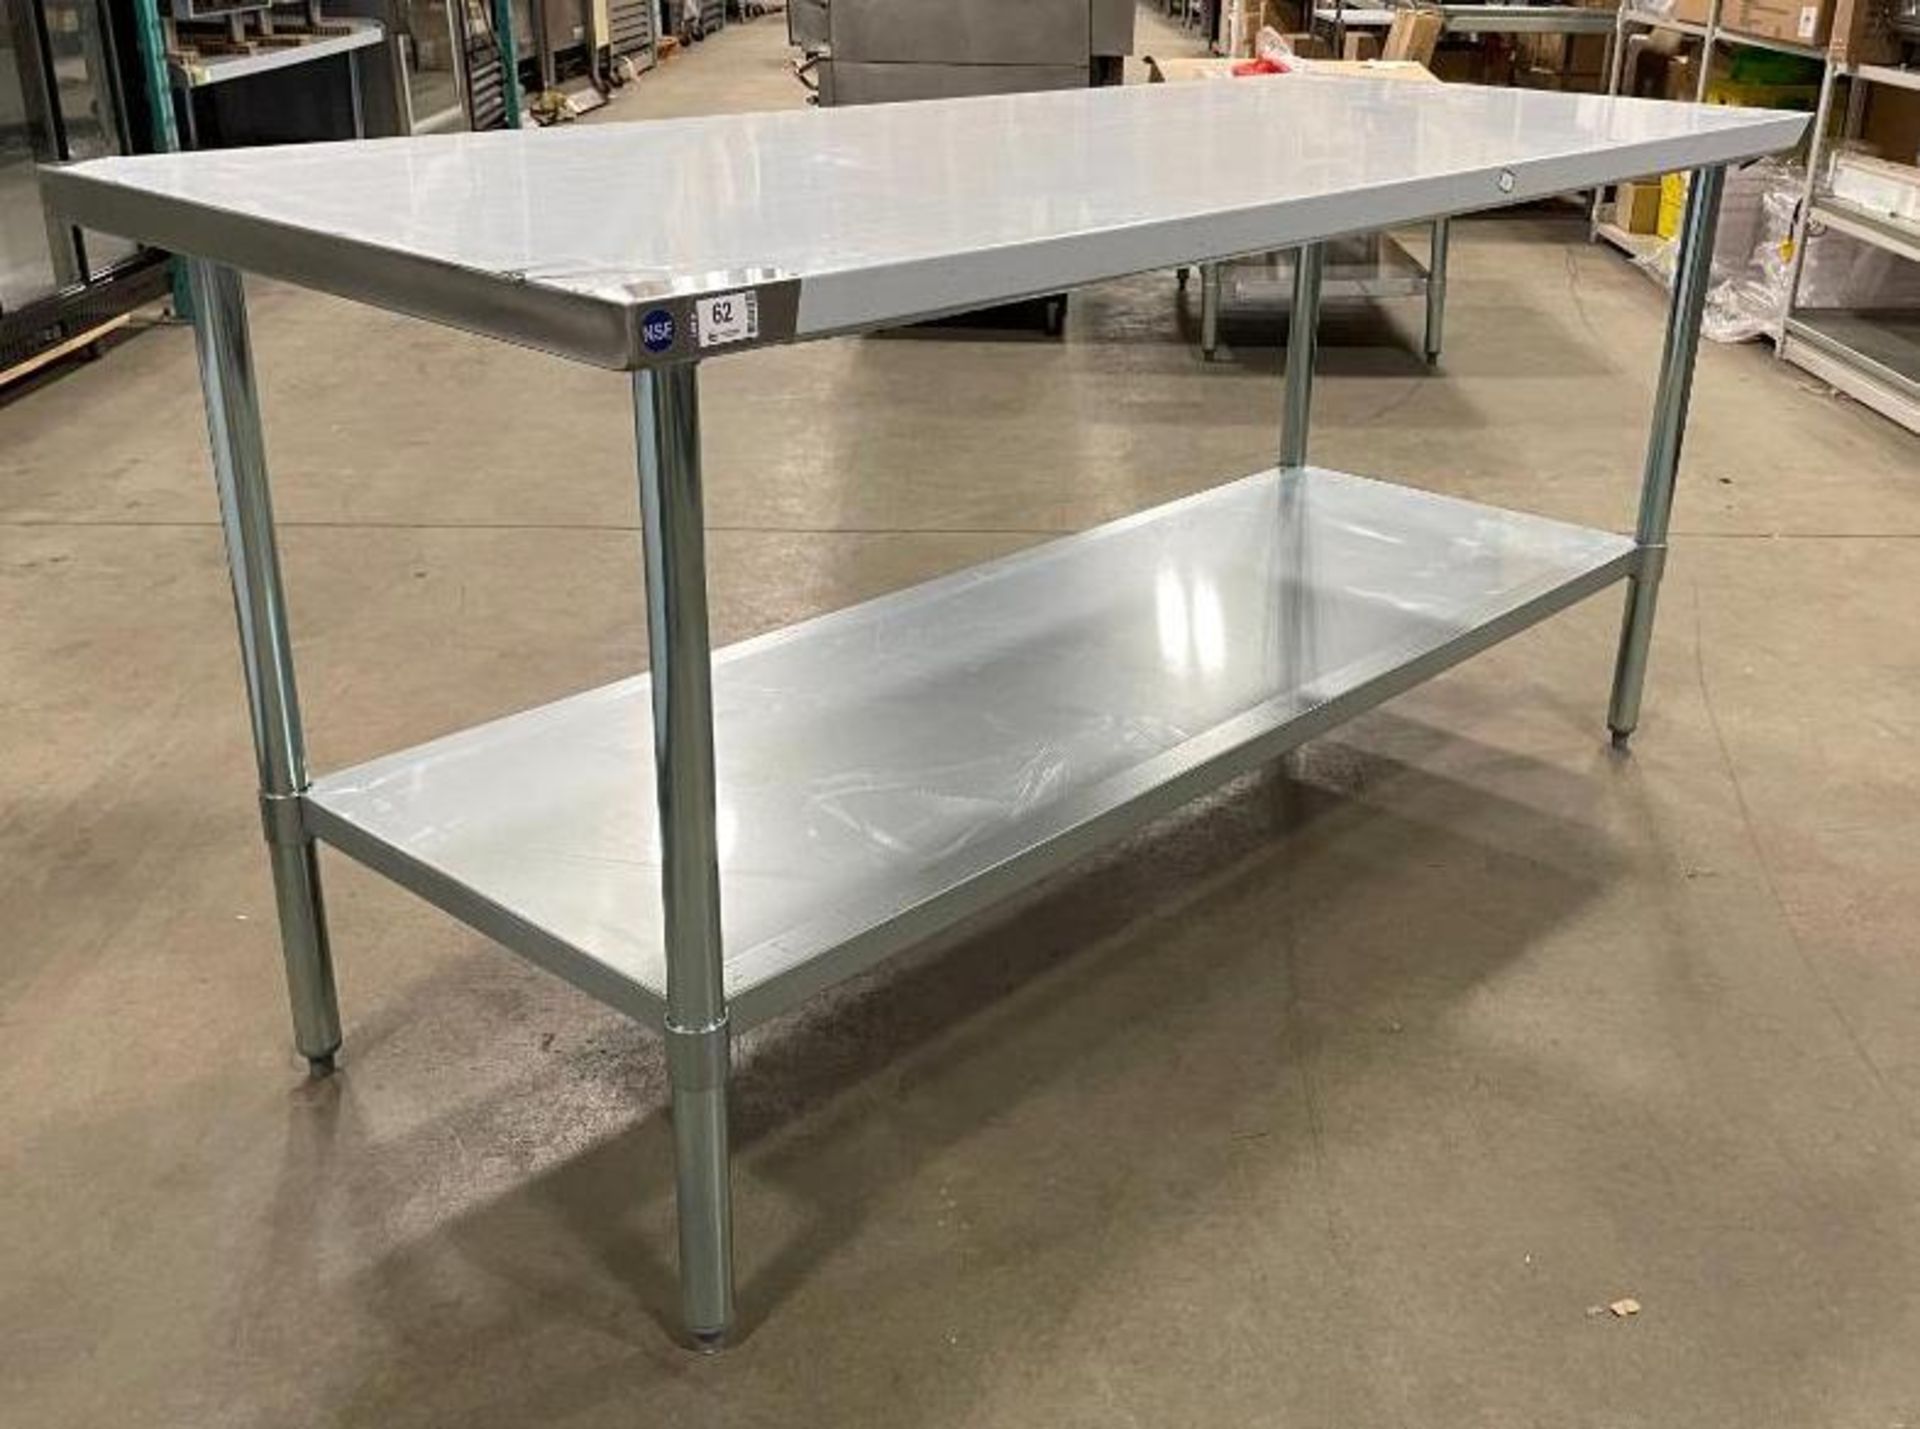 NEW 30" X 72" STAINLESS STEEL WORK TABLE WITH UNDERSHELF - Image 2 of 10